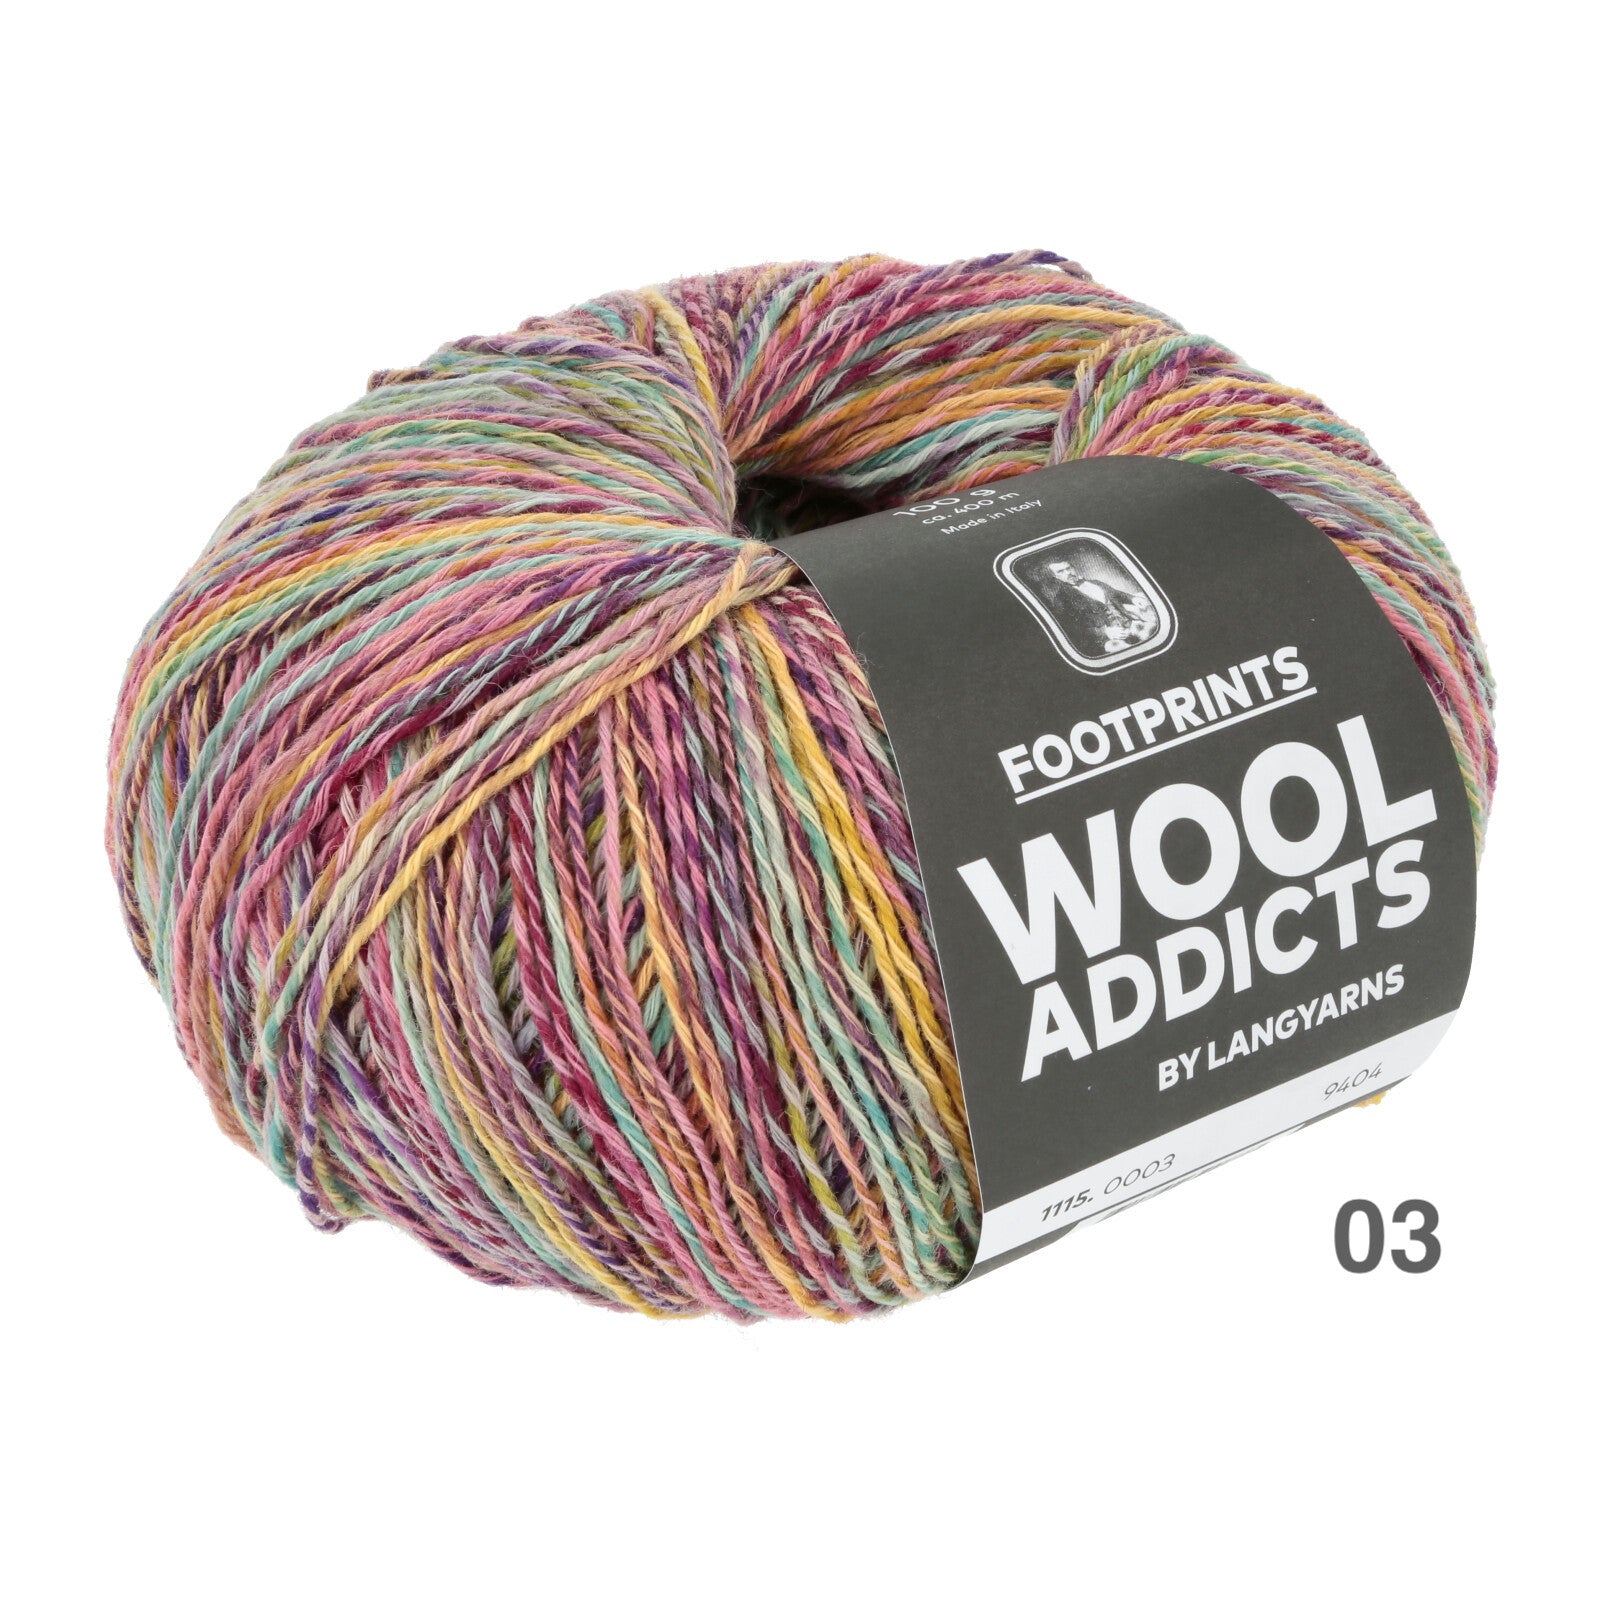 Footprints by Wool Addicts color 03